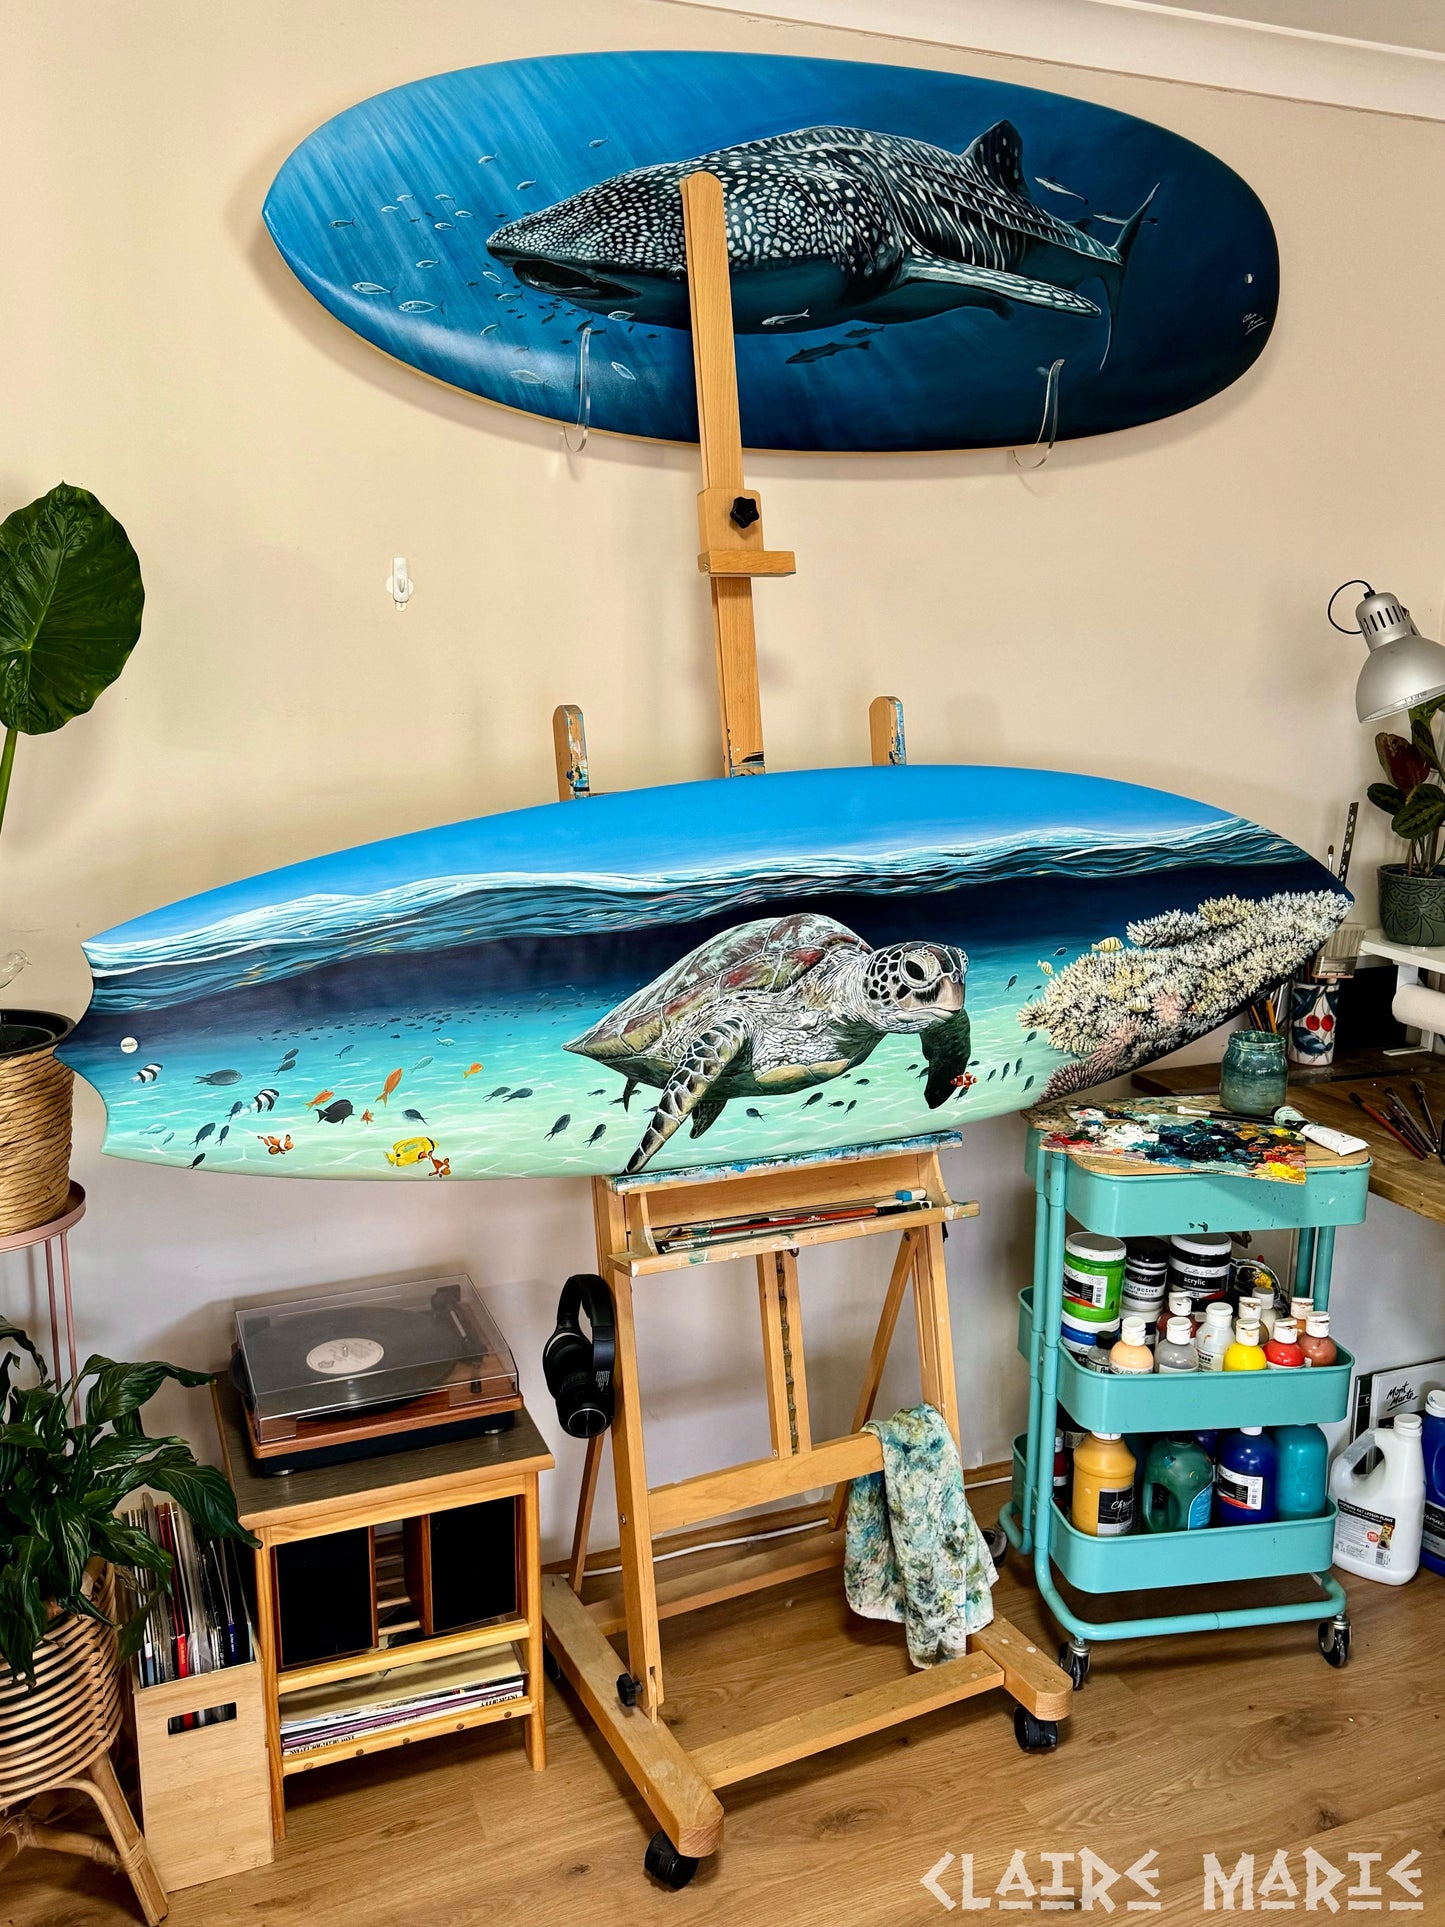 "Emmie the Sea Turtle" - Hand-Painted Surfboard